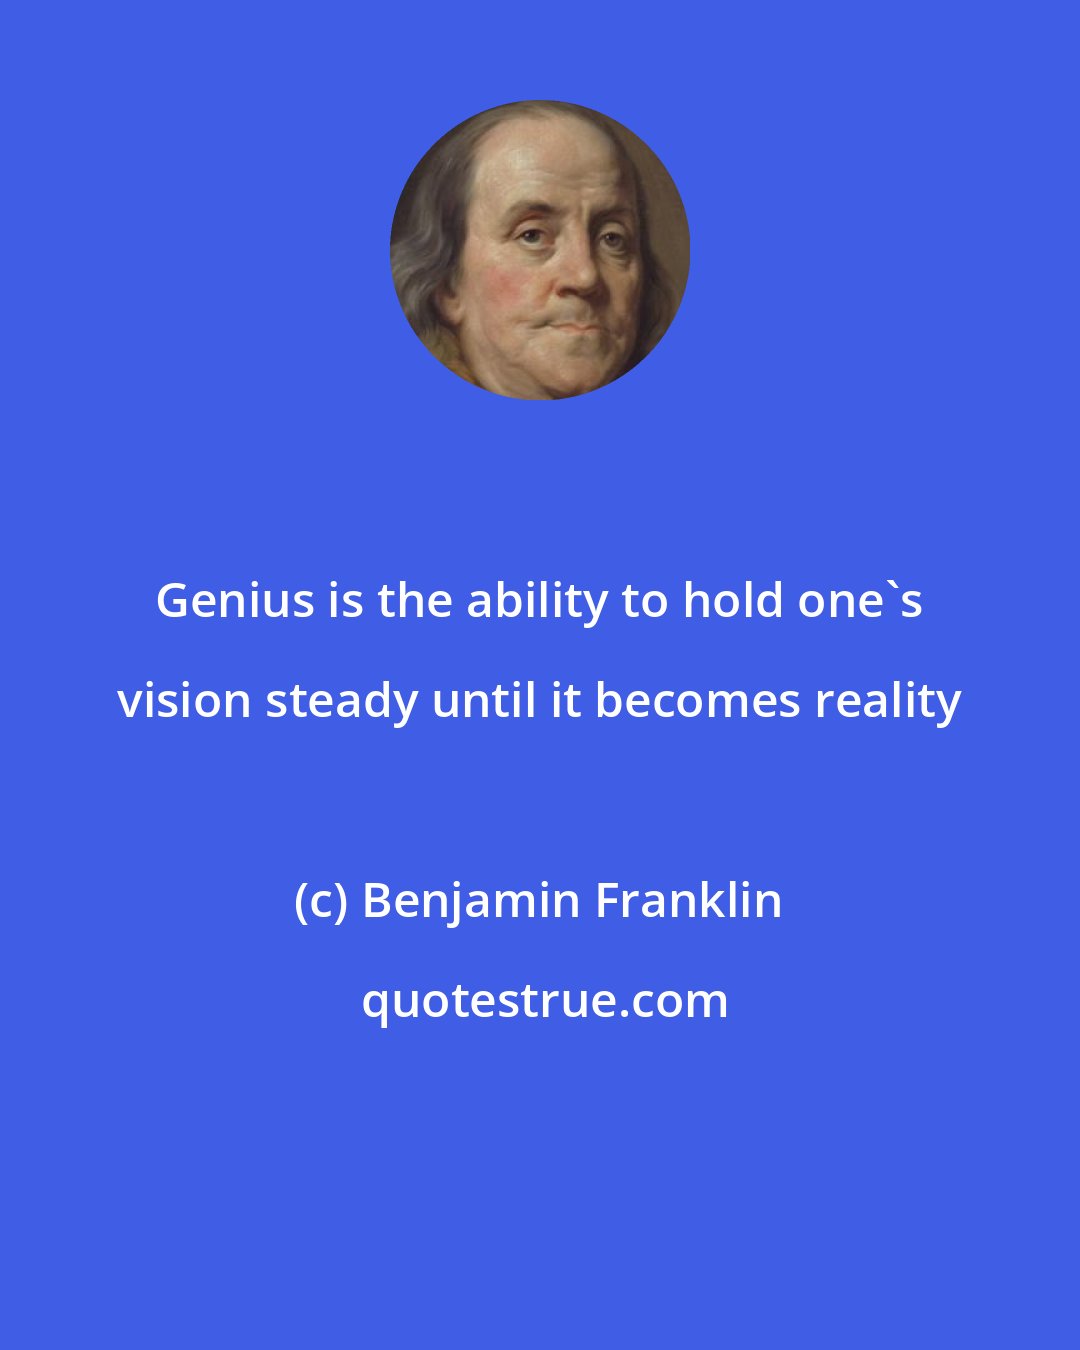 Benjamin Franklin: Genius is the ability to hold one's vision steady until it becomes reality